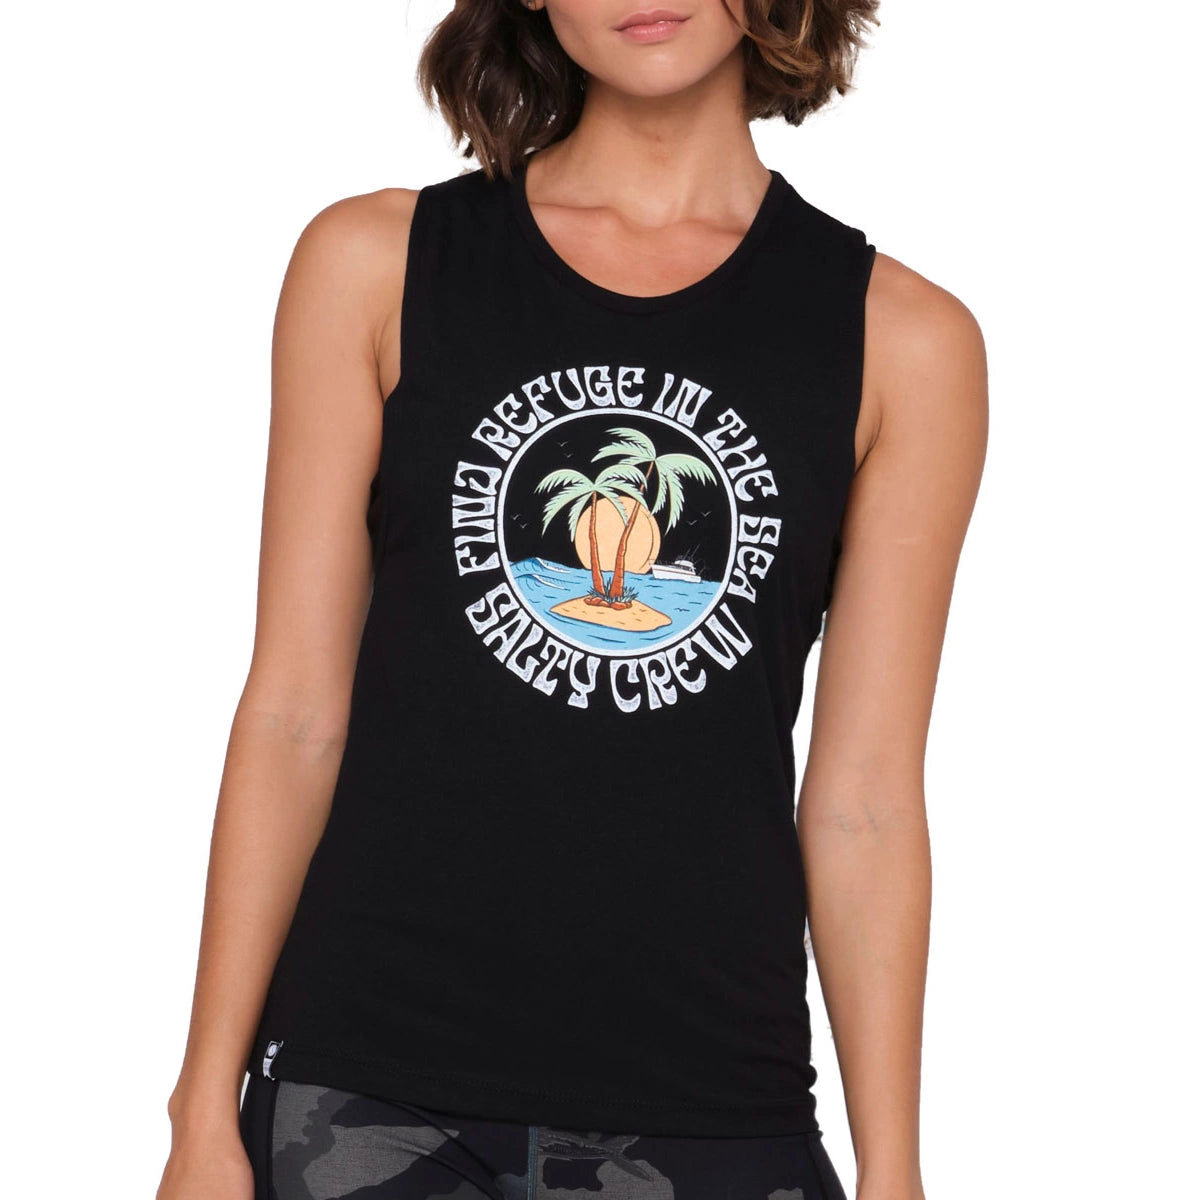 Dos Palms Muscle Tank